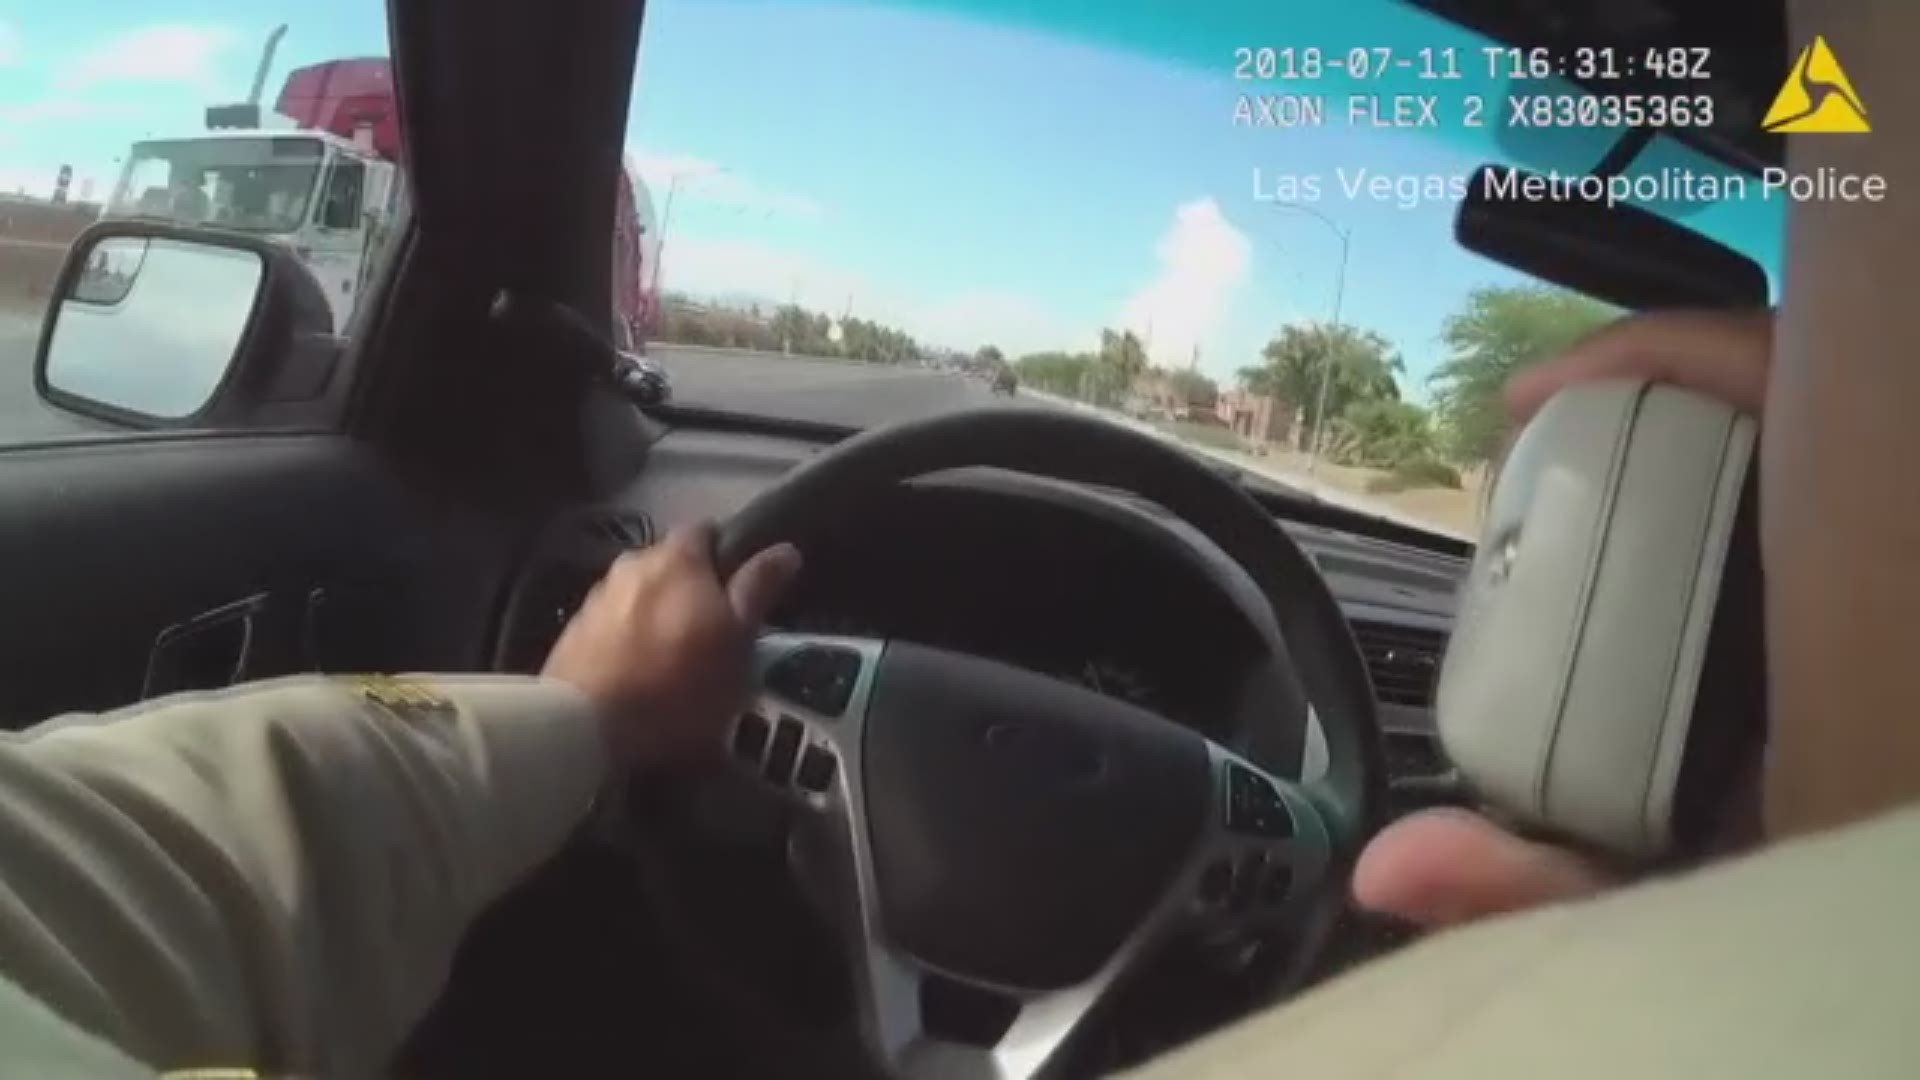 An officer involved in the chase activated his body camera and captured the final moments as murder suspects fired shots at officers along busy streets near downtown Las Vegas.